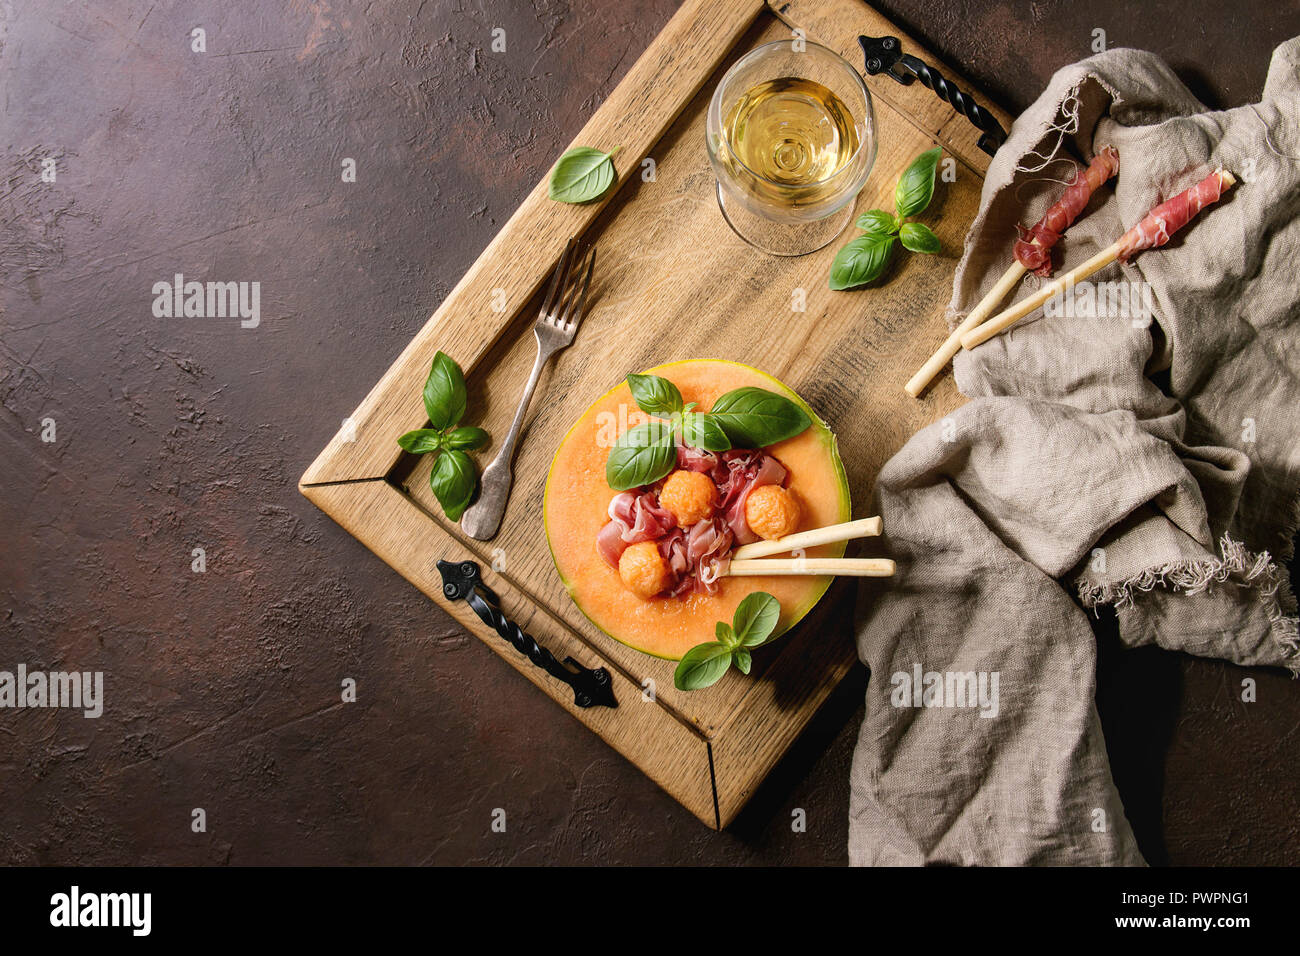 Melon and ham salad served in half of Cantaloupe melon with fresh basil and grissini bread on wooden serving tray over dark brown texture background w Stock Photo